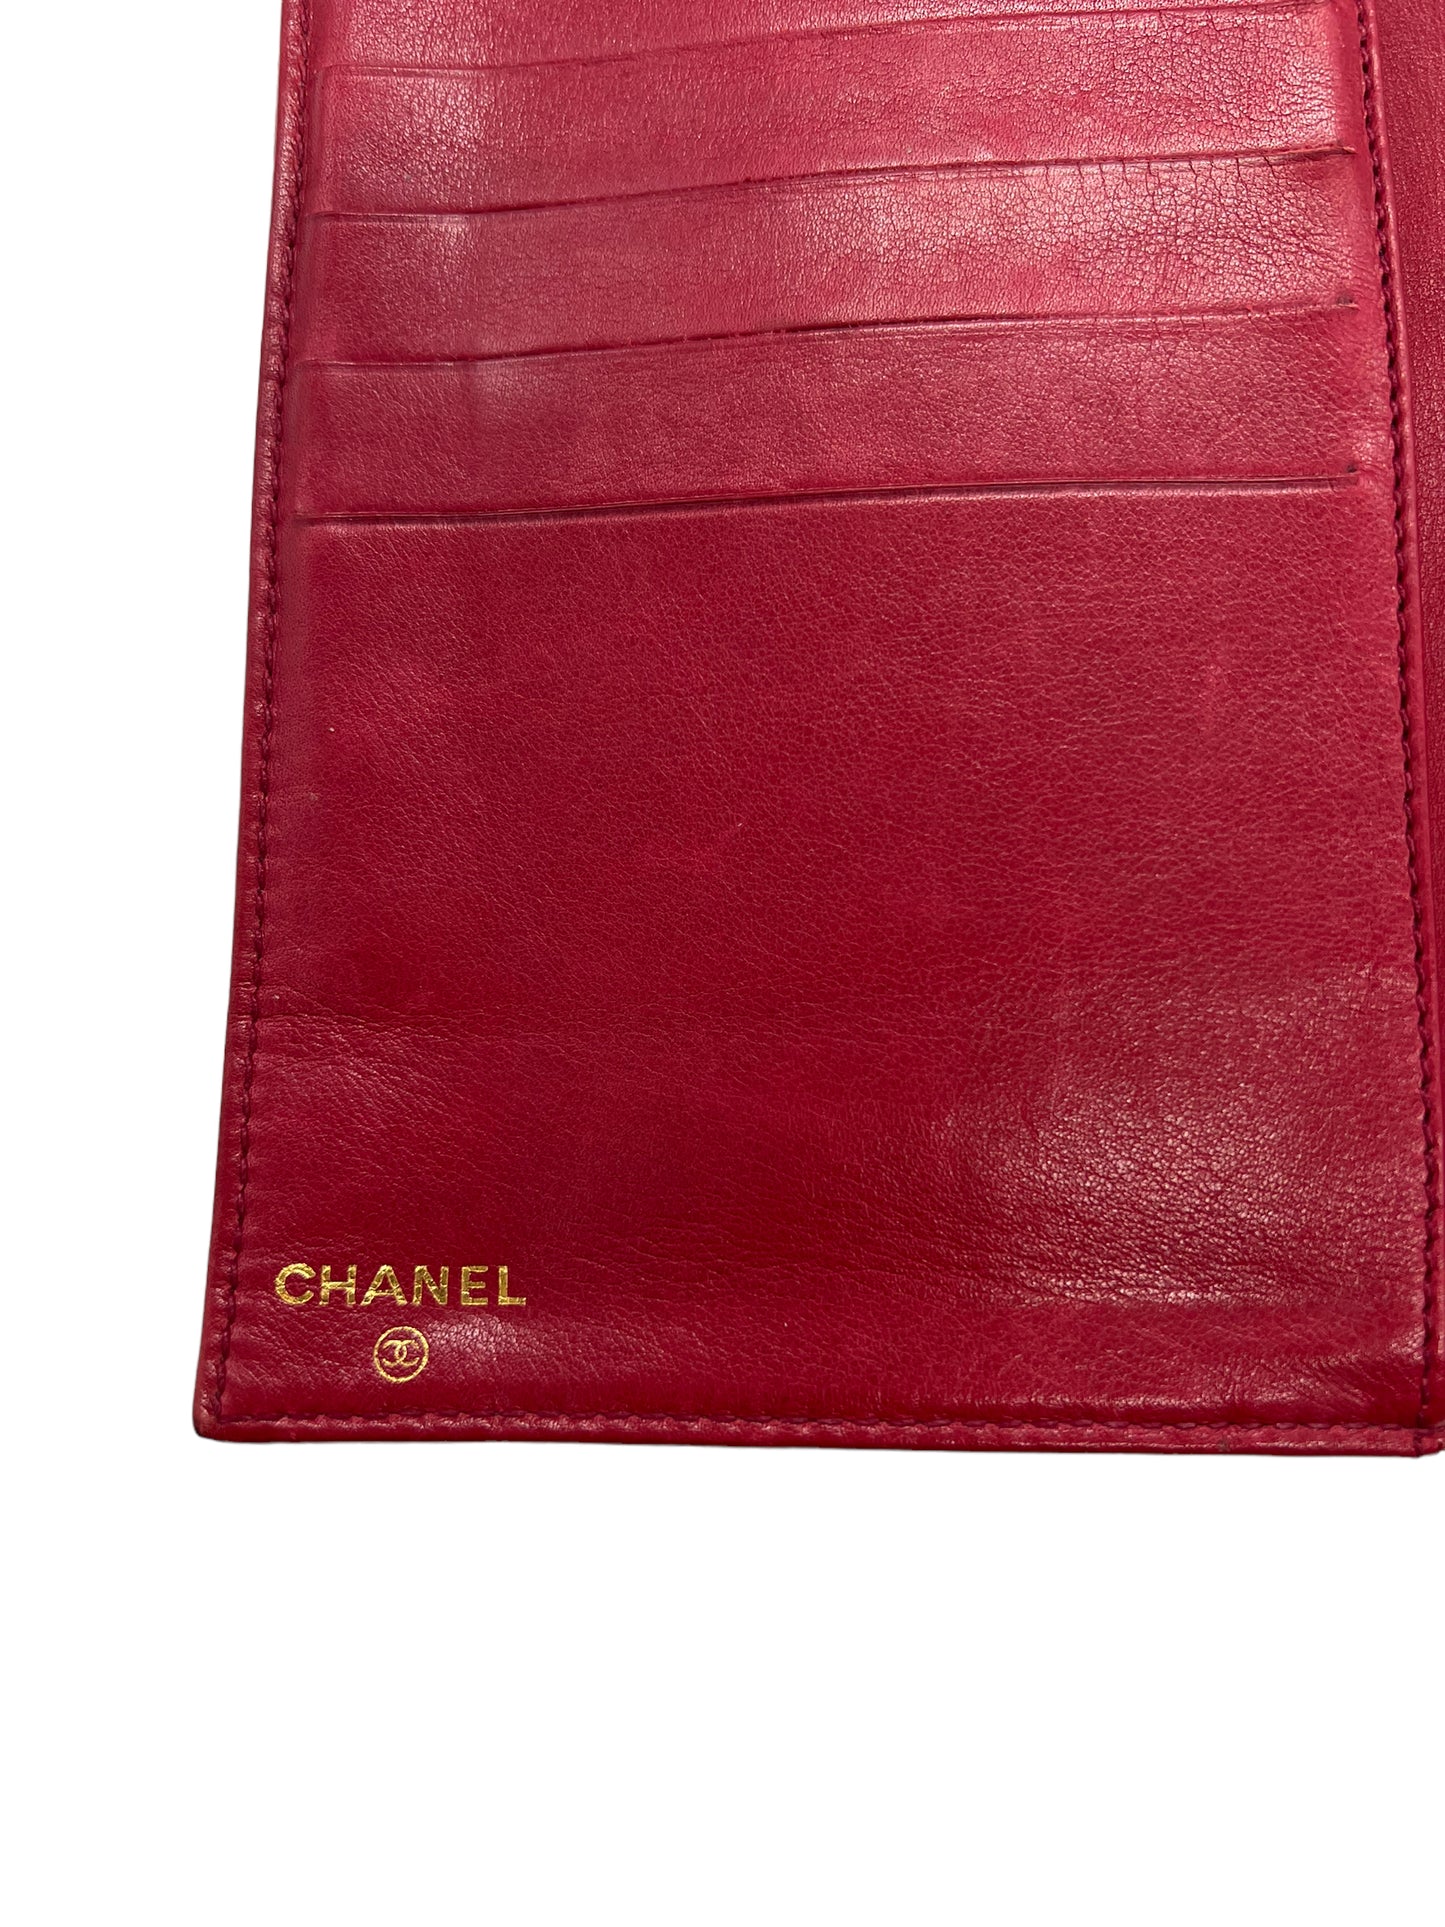 Chanel Red Caviar Vintage 1991-1994 Timeless French Purse Wallet